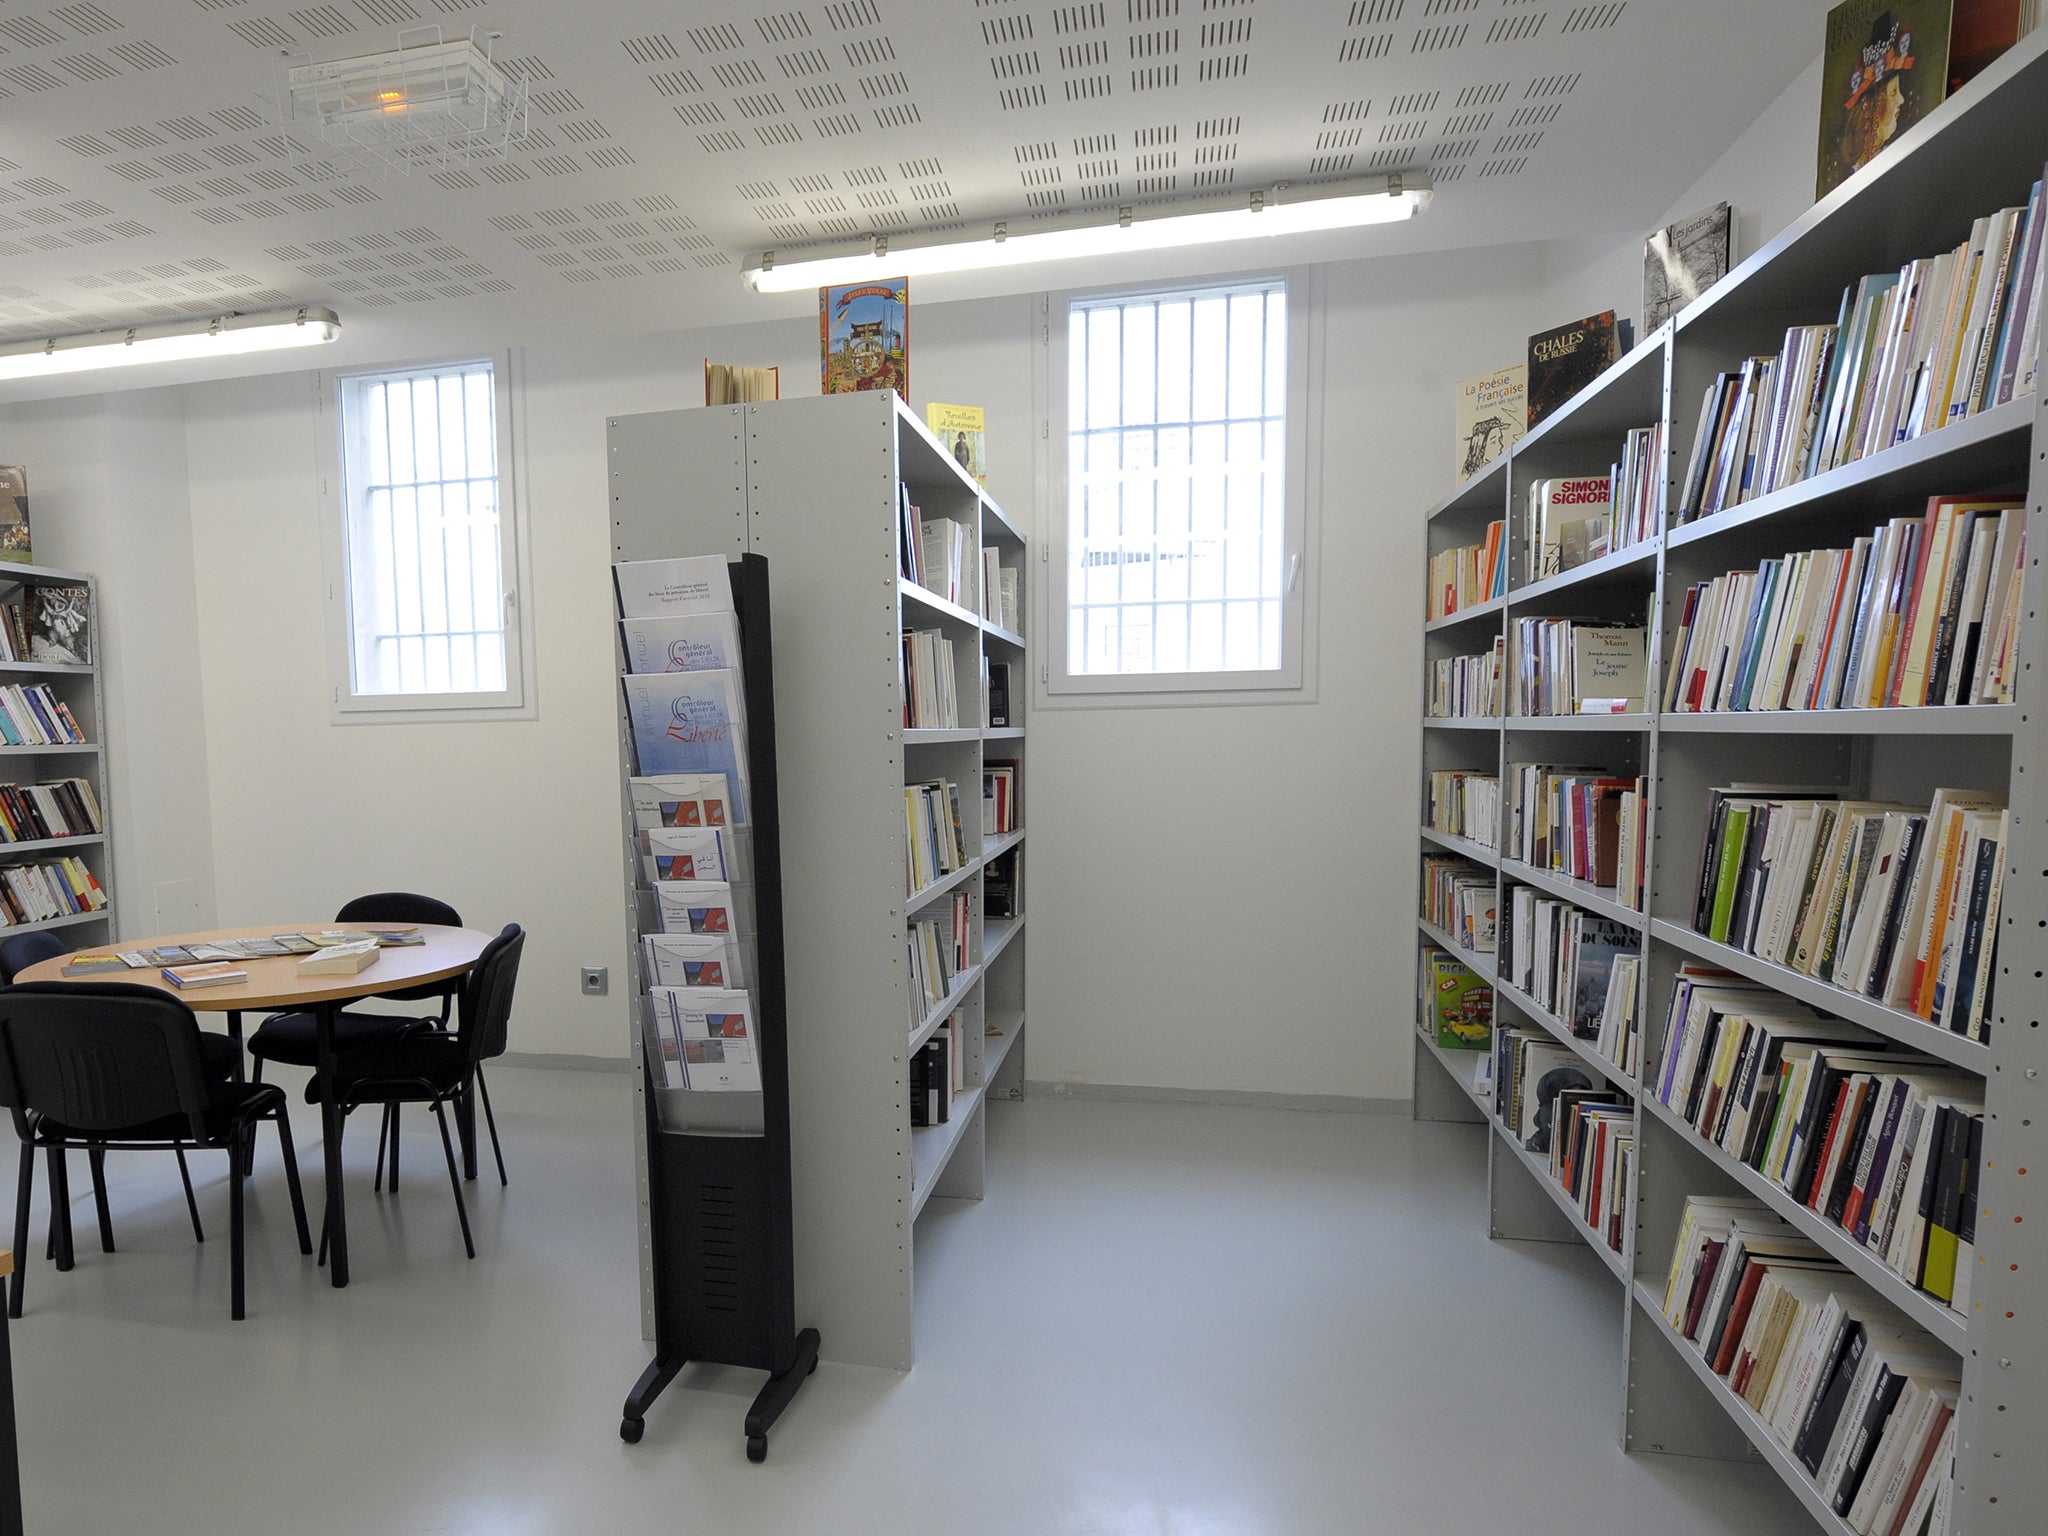 The concession was made after the year-long Books for Prisoners campaign